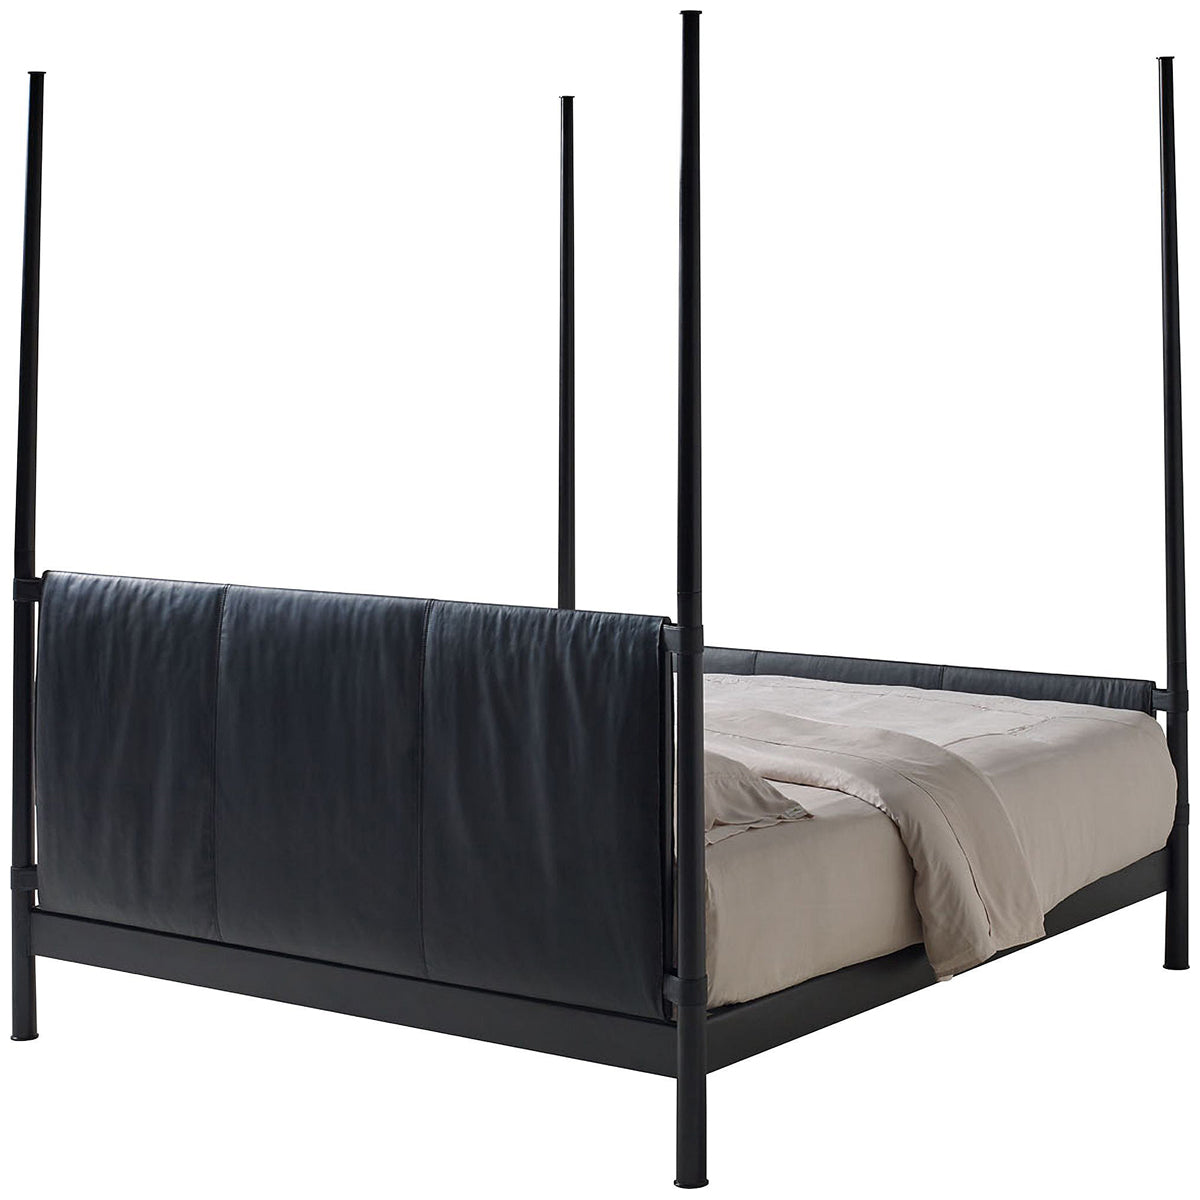 Baker Furniture Caged Bed with Post MR7021